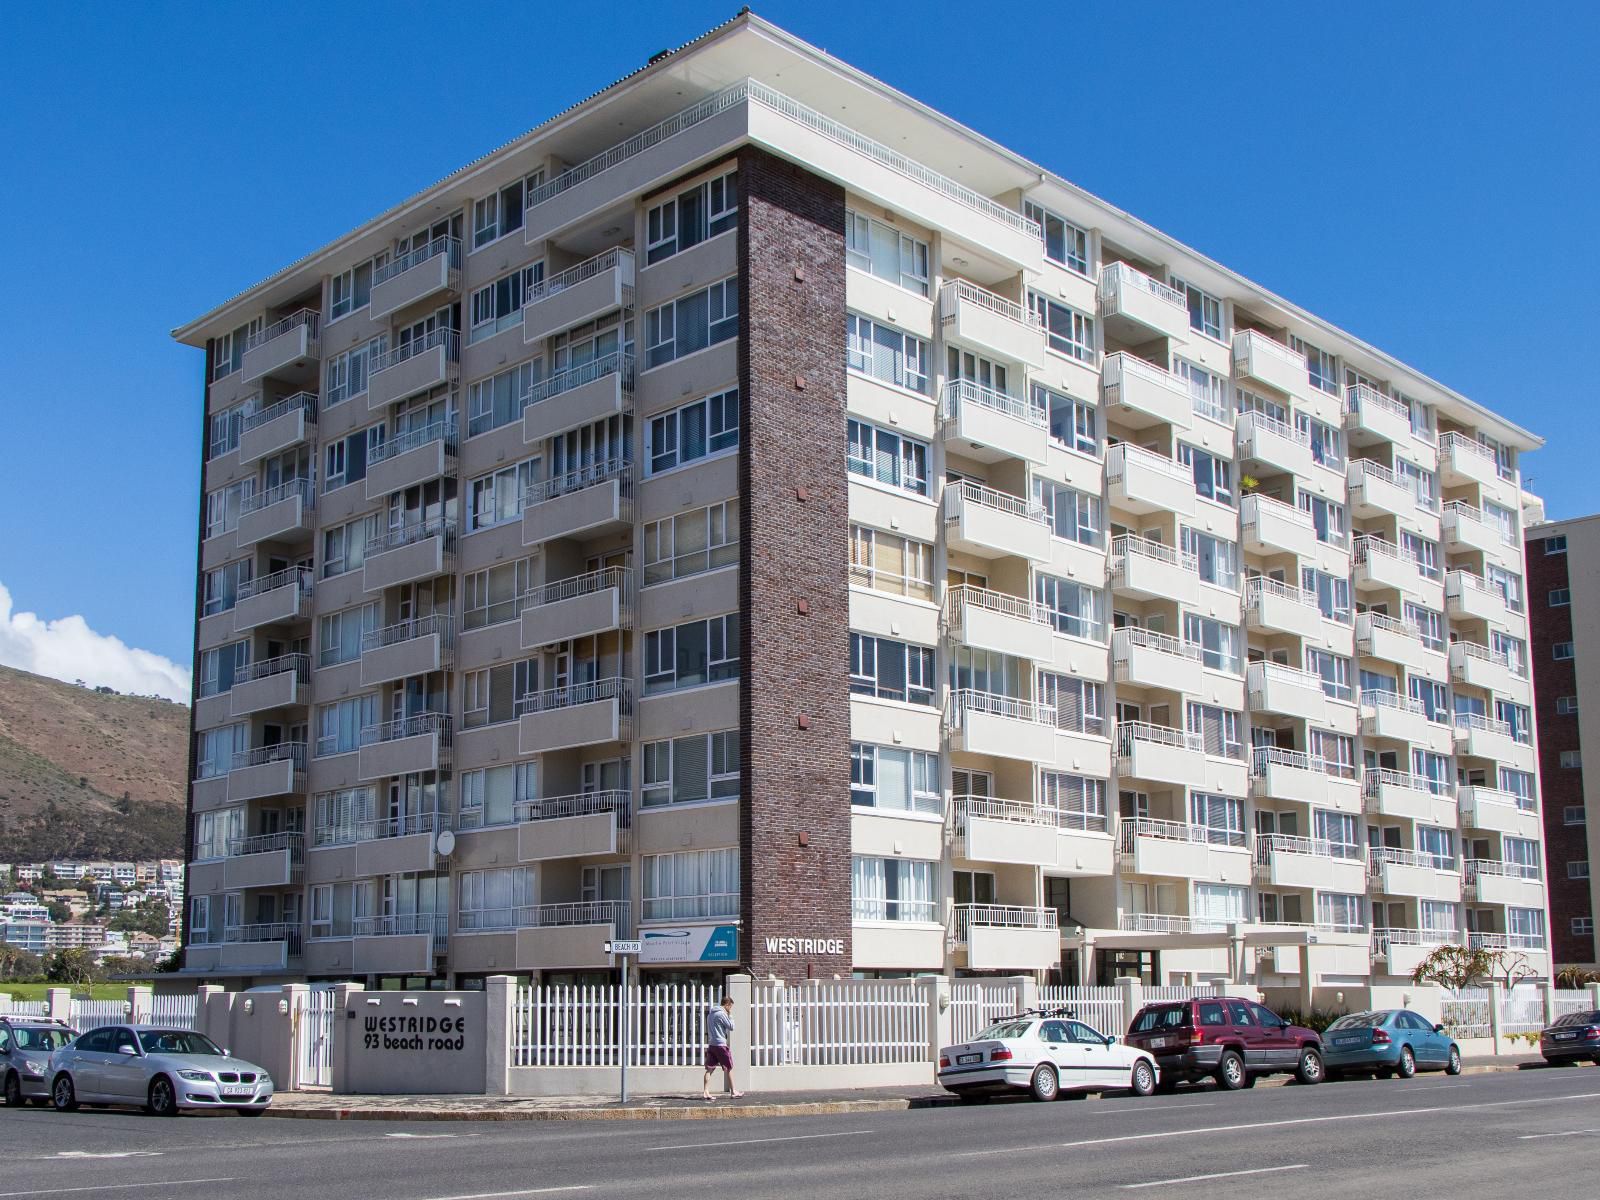 Mouille Point Village Two Bedroom Apartments Mouille Point Cape Town Western Cape South Africa Building, Architecture, Facade, House